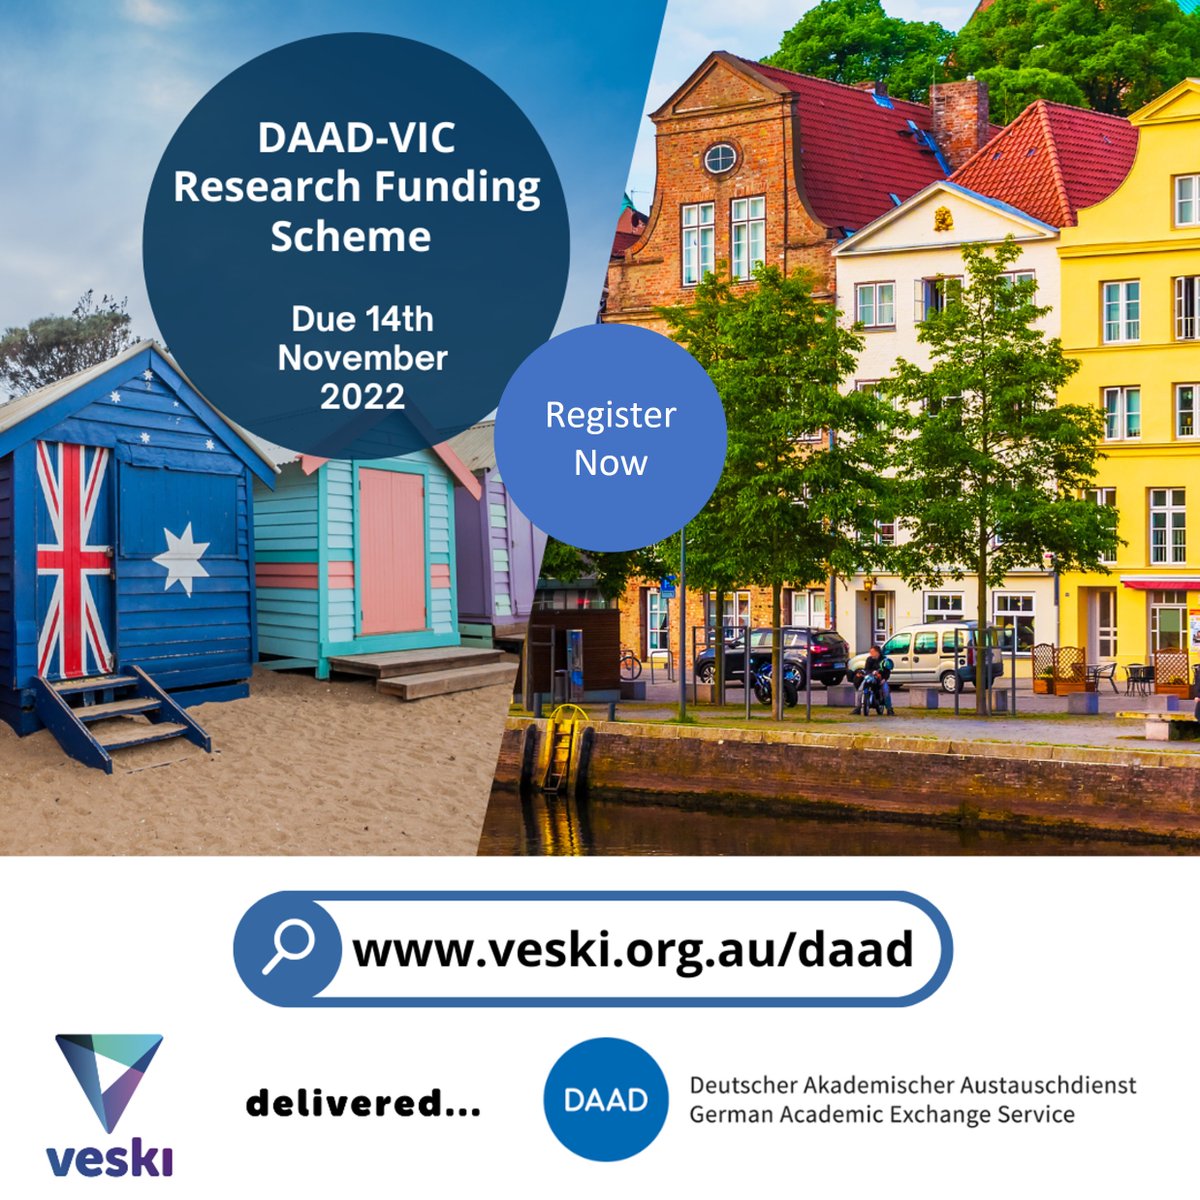 Are you a post doctorate or faculty member at a Victorian university? Register for the DAAD-VIC Research Funding Scheme and apply to receive support for your well-planned collaborative research project with German cooperation partners. ➡️veski.org.au/daad/ @DAAD_Australia